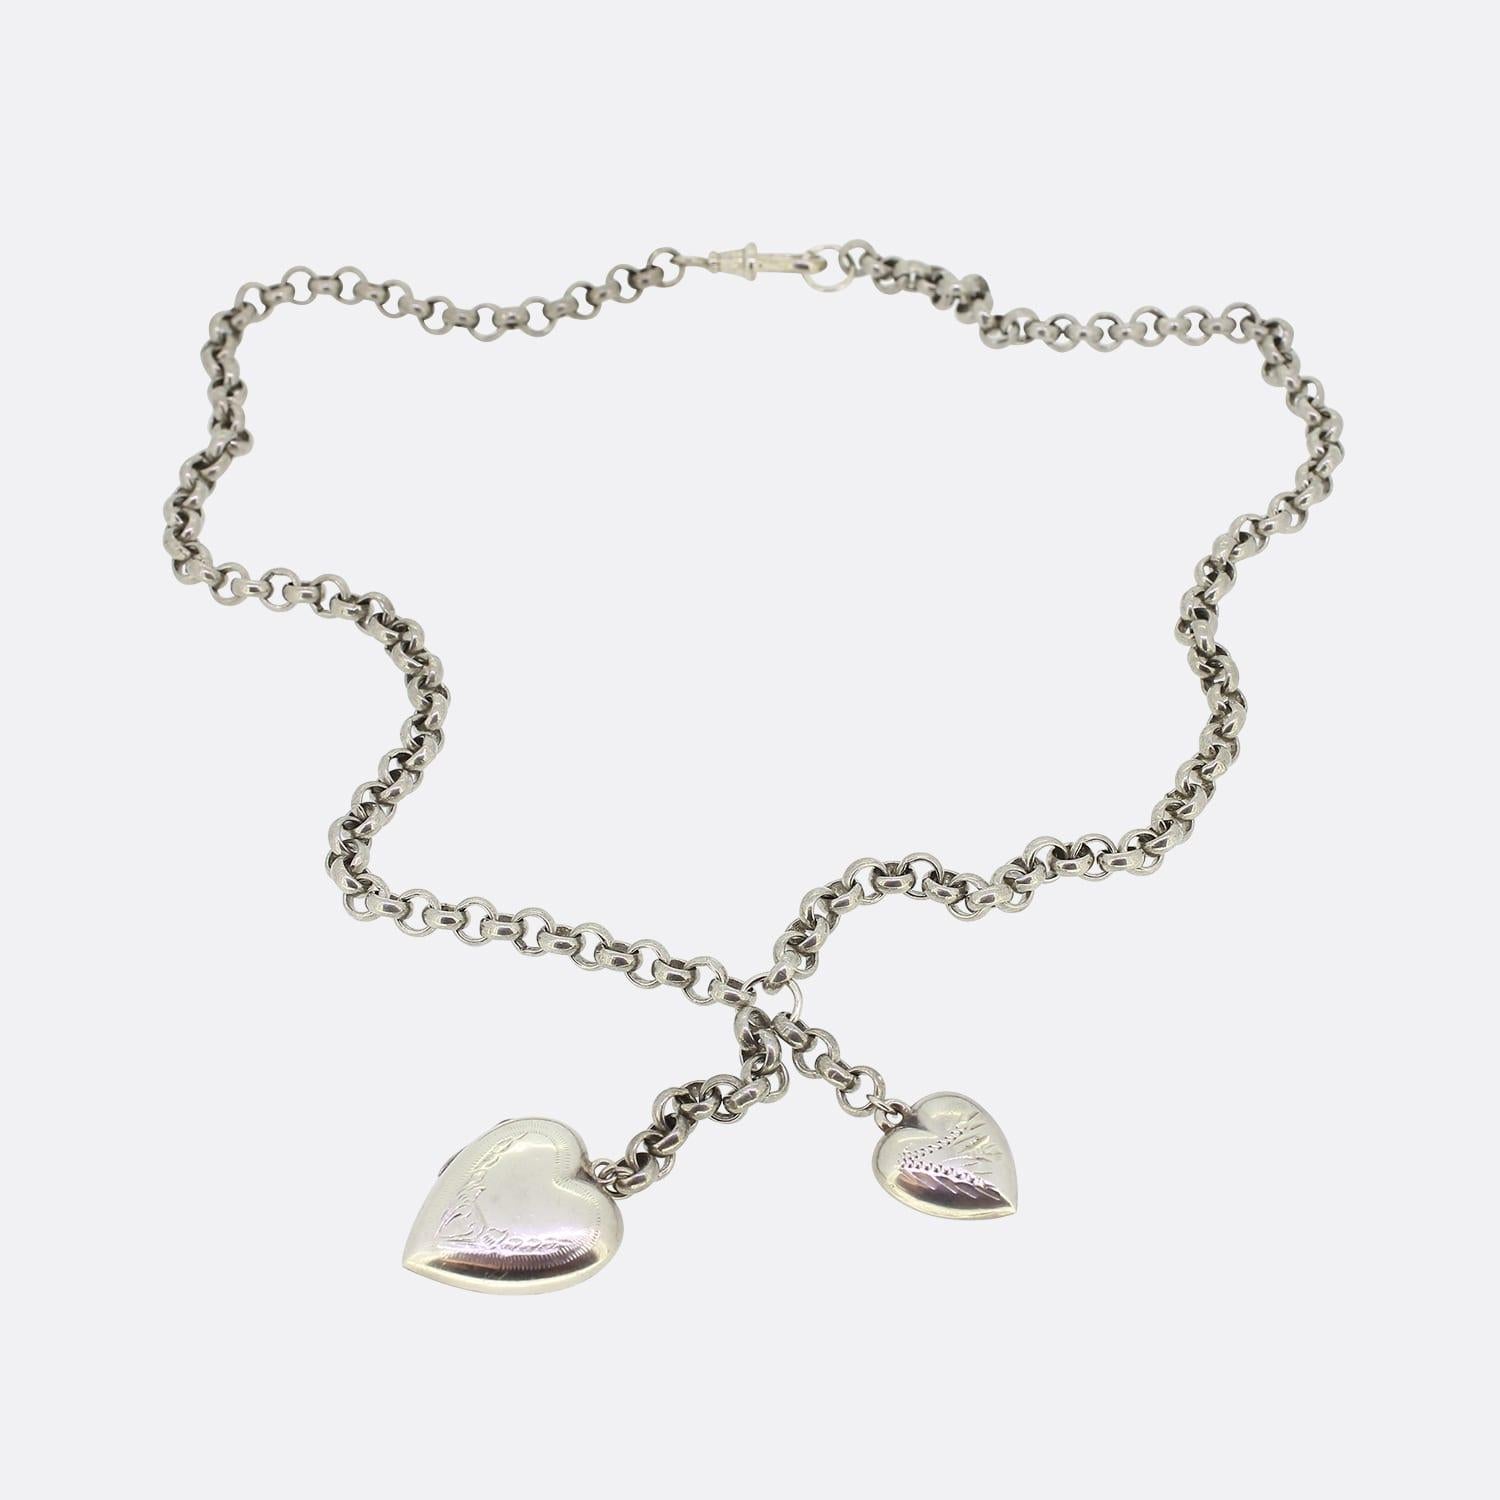 This is a vintage sterling silver belcher charm necklace. The necklace has two charms attached throughout the chain including a puffy engraved silver heart and an engraved silver heart locket. The whole chain and charms have been made in sterling